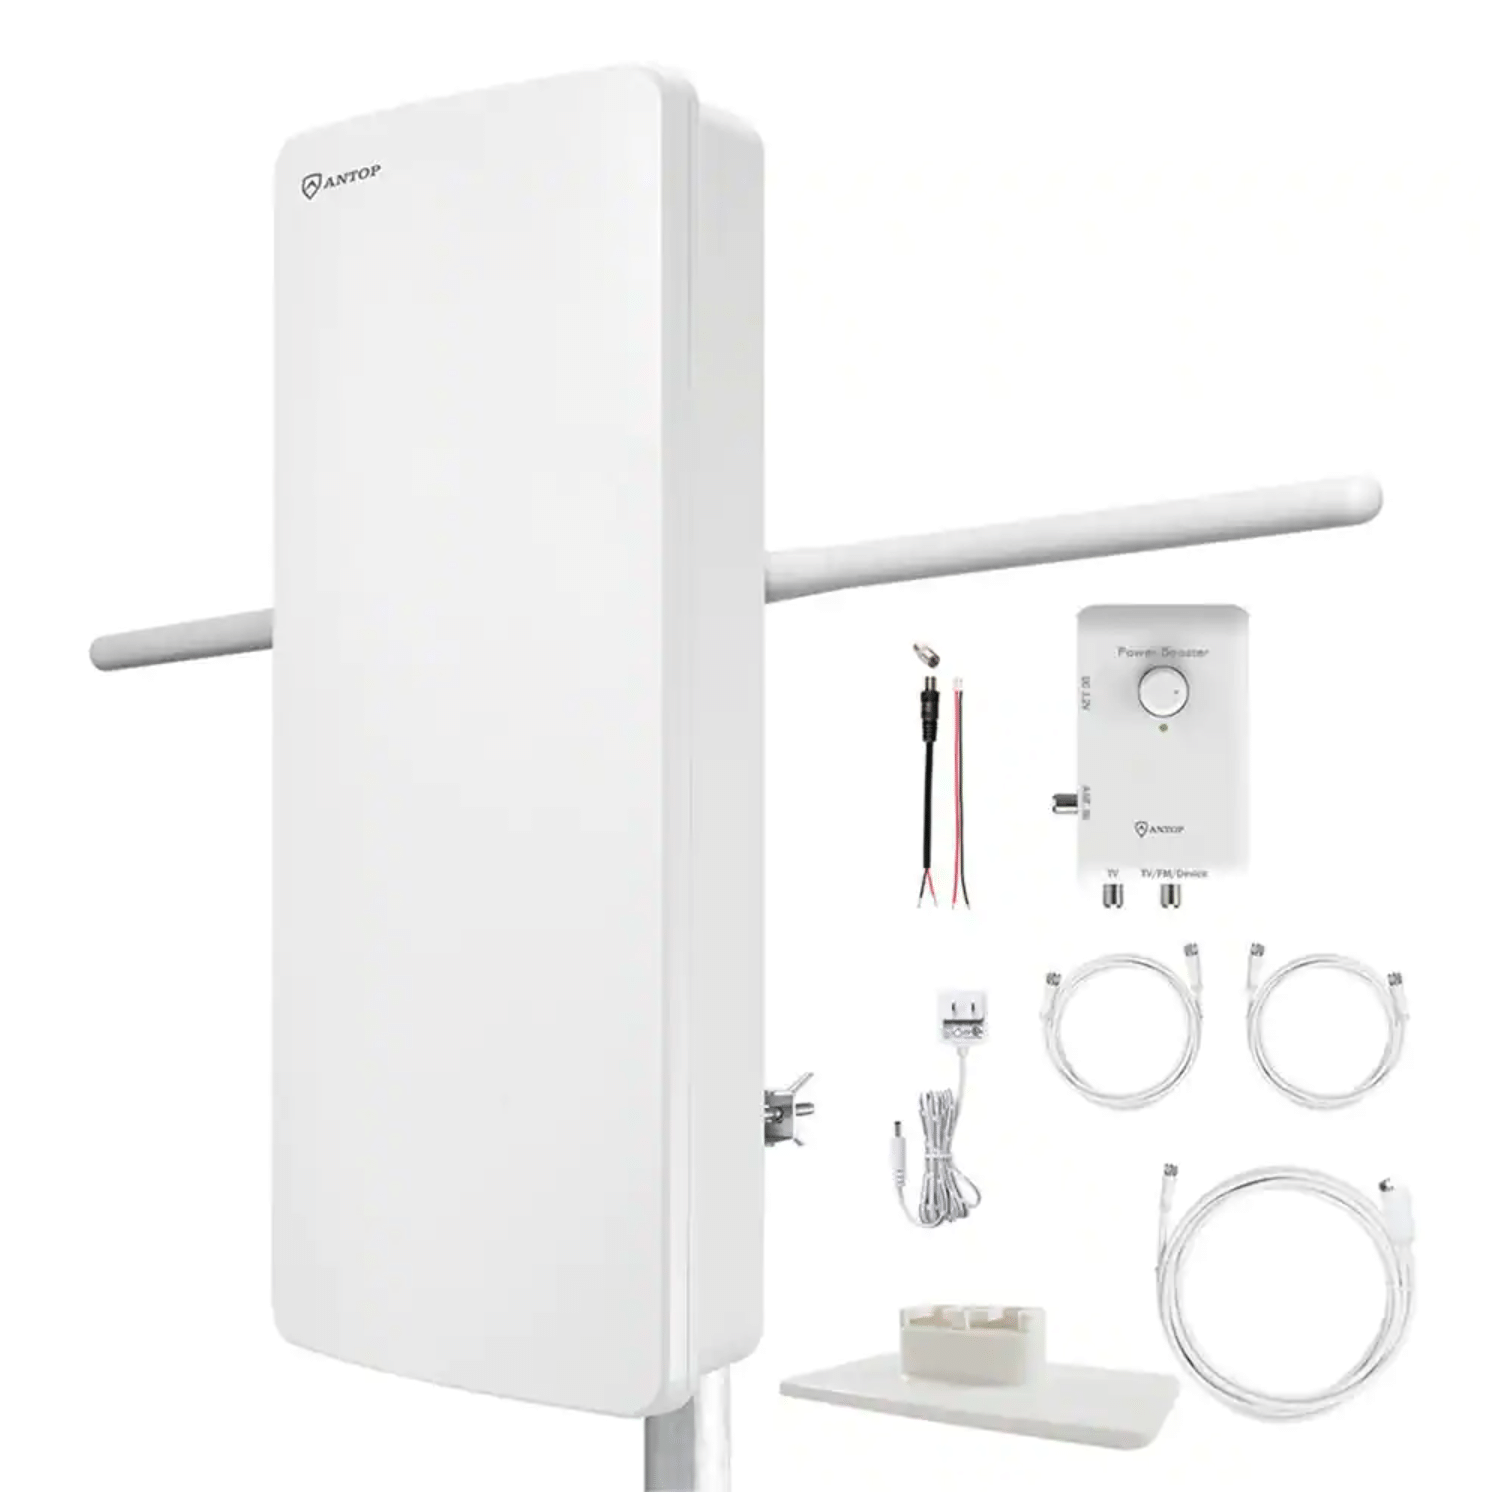 Antop AT-800SBS HD Smart Panel Amplified HDTV and FM Amplified Indoor/Outdoor Antenna